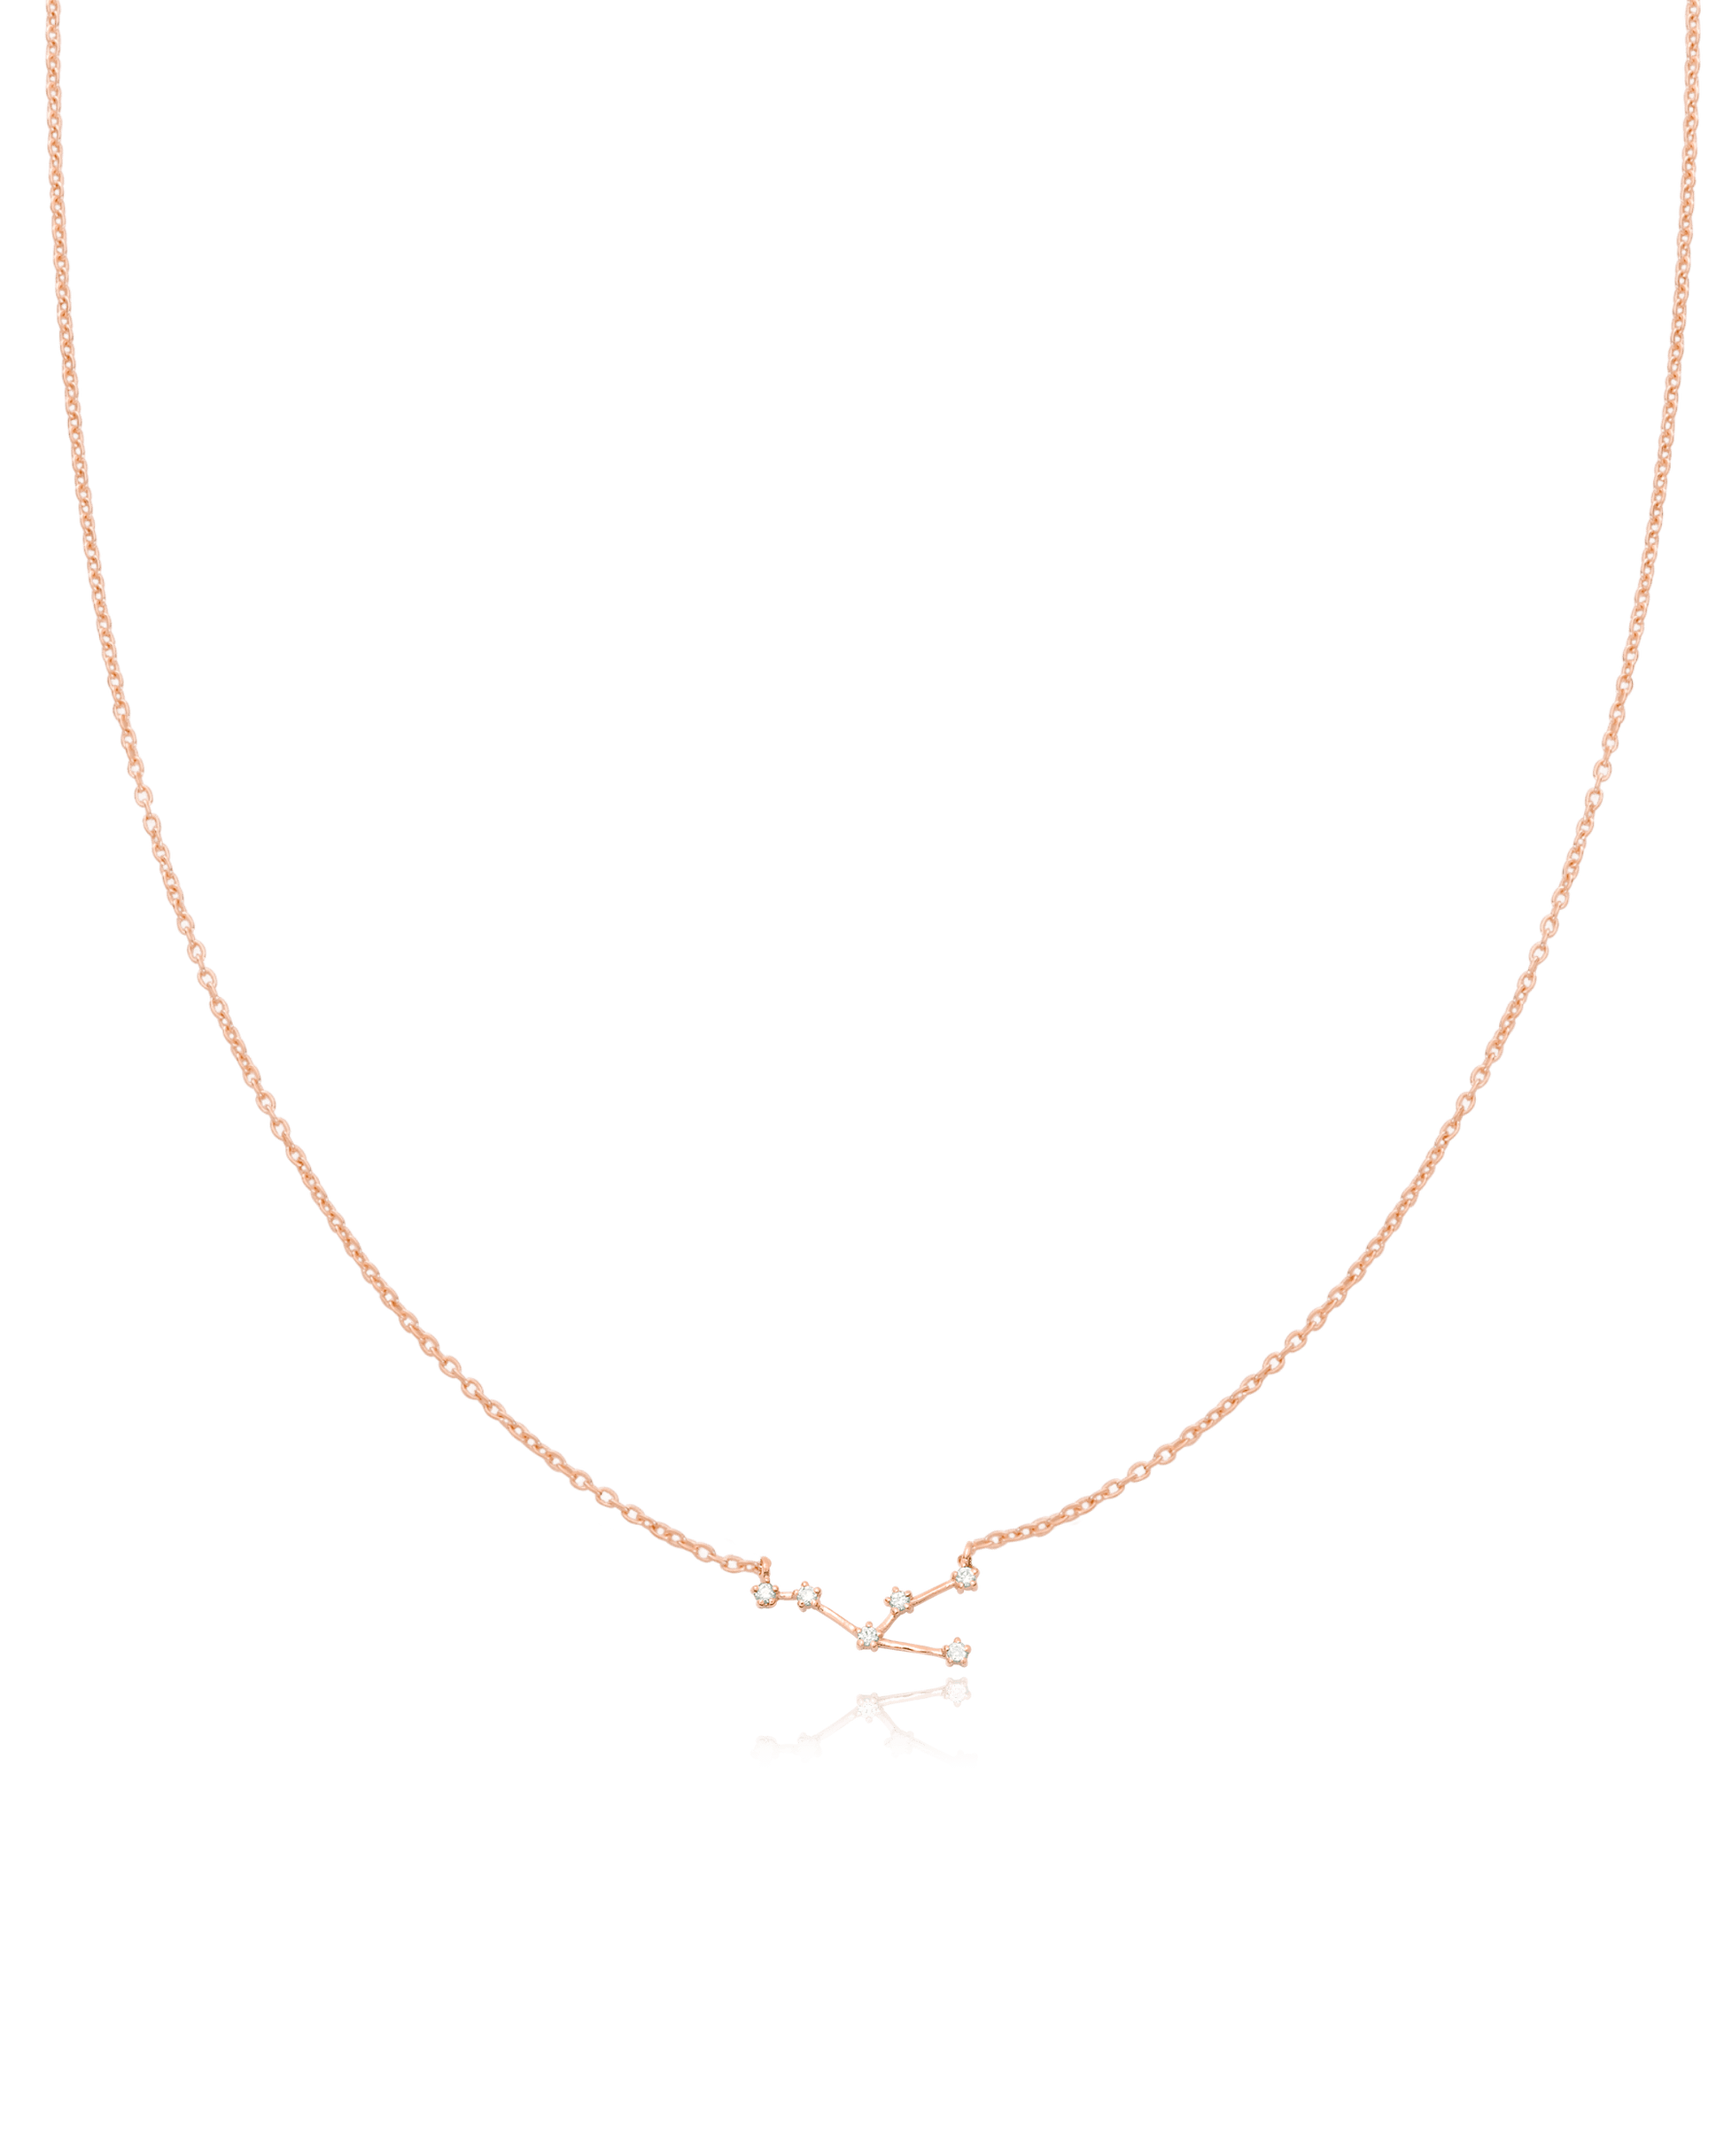 Taurus Constellation Necklace - 925 Sterling Silver Necklaces magal-dev 